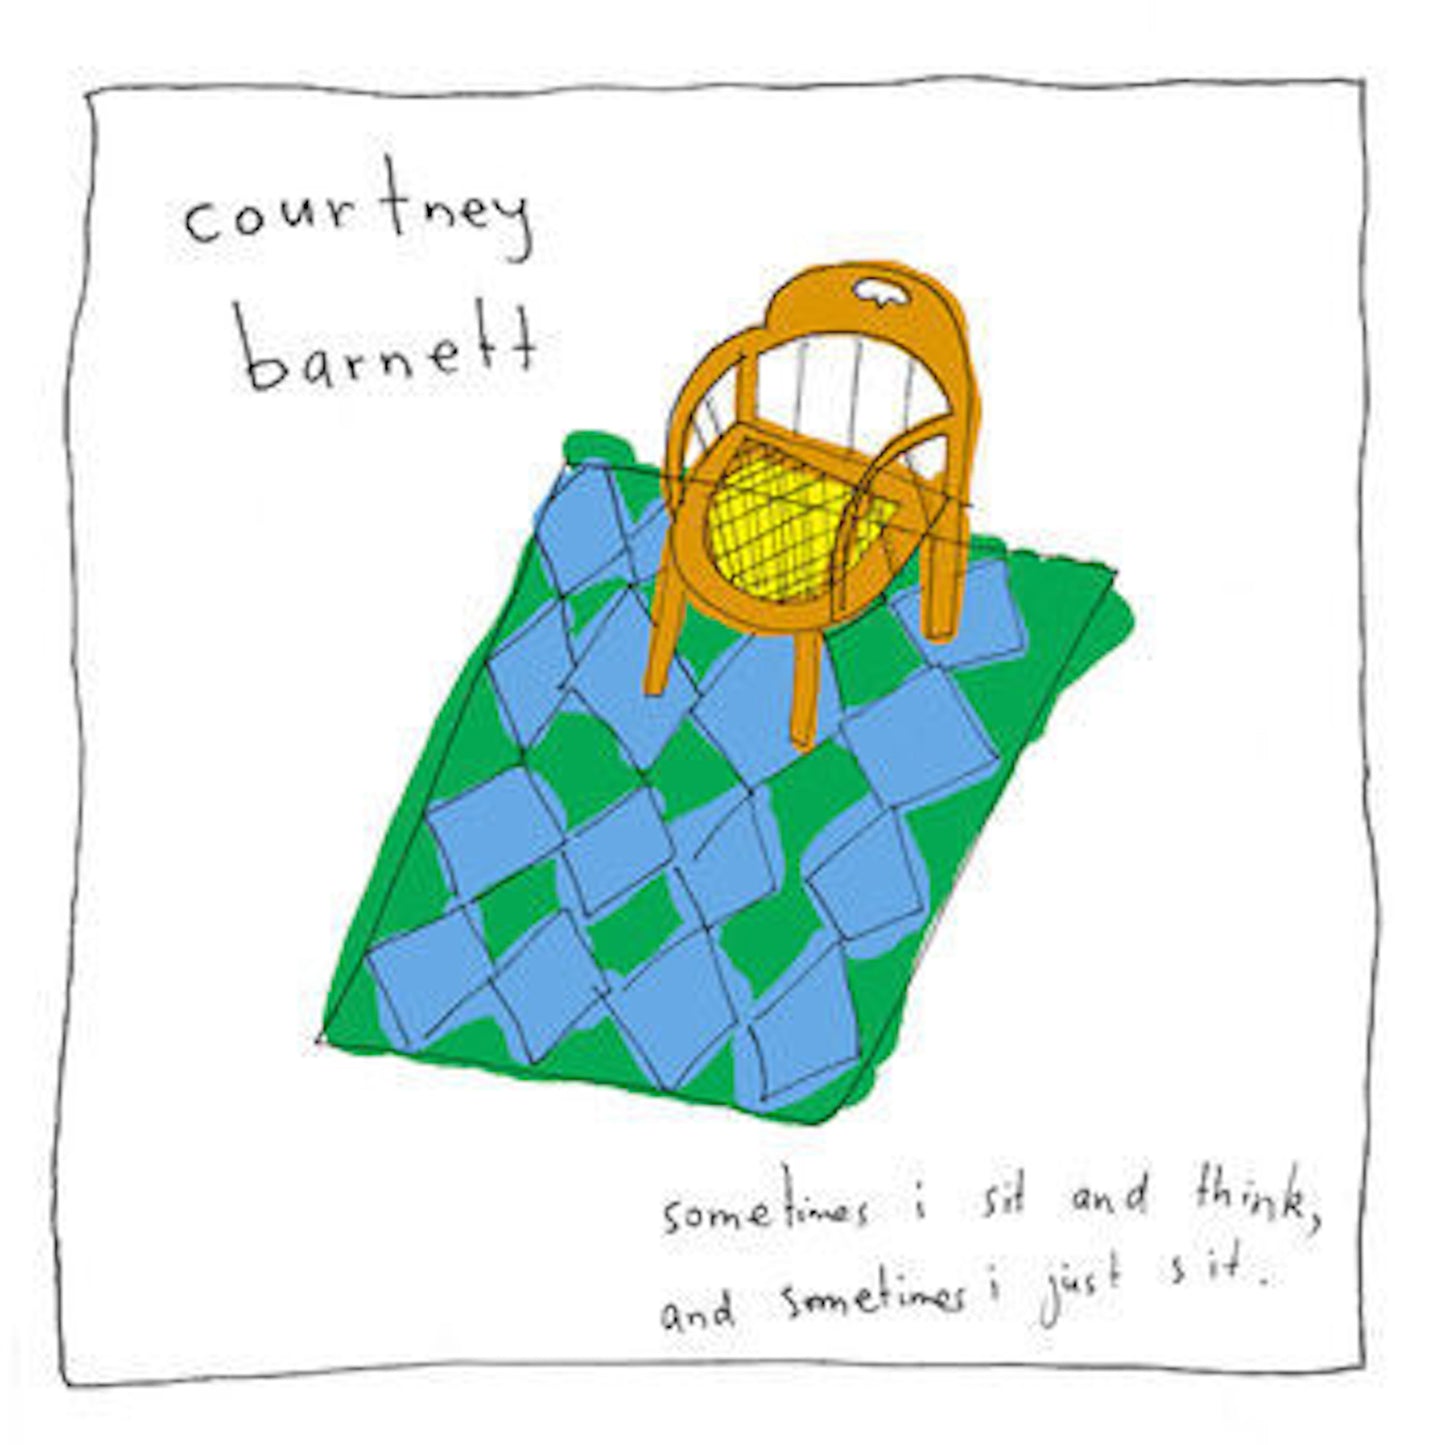 Barnett, Courtney - Sometimes I Sit and Think, and Sometimes I Just Sit